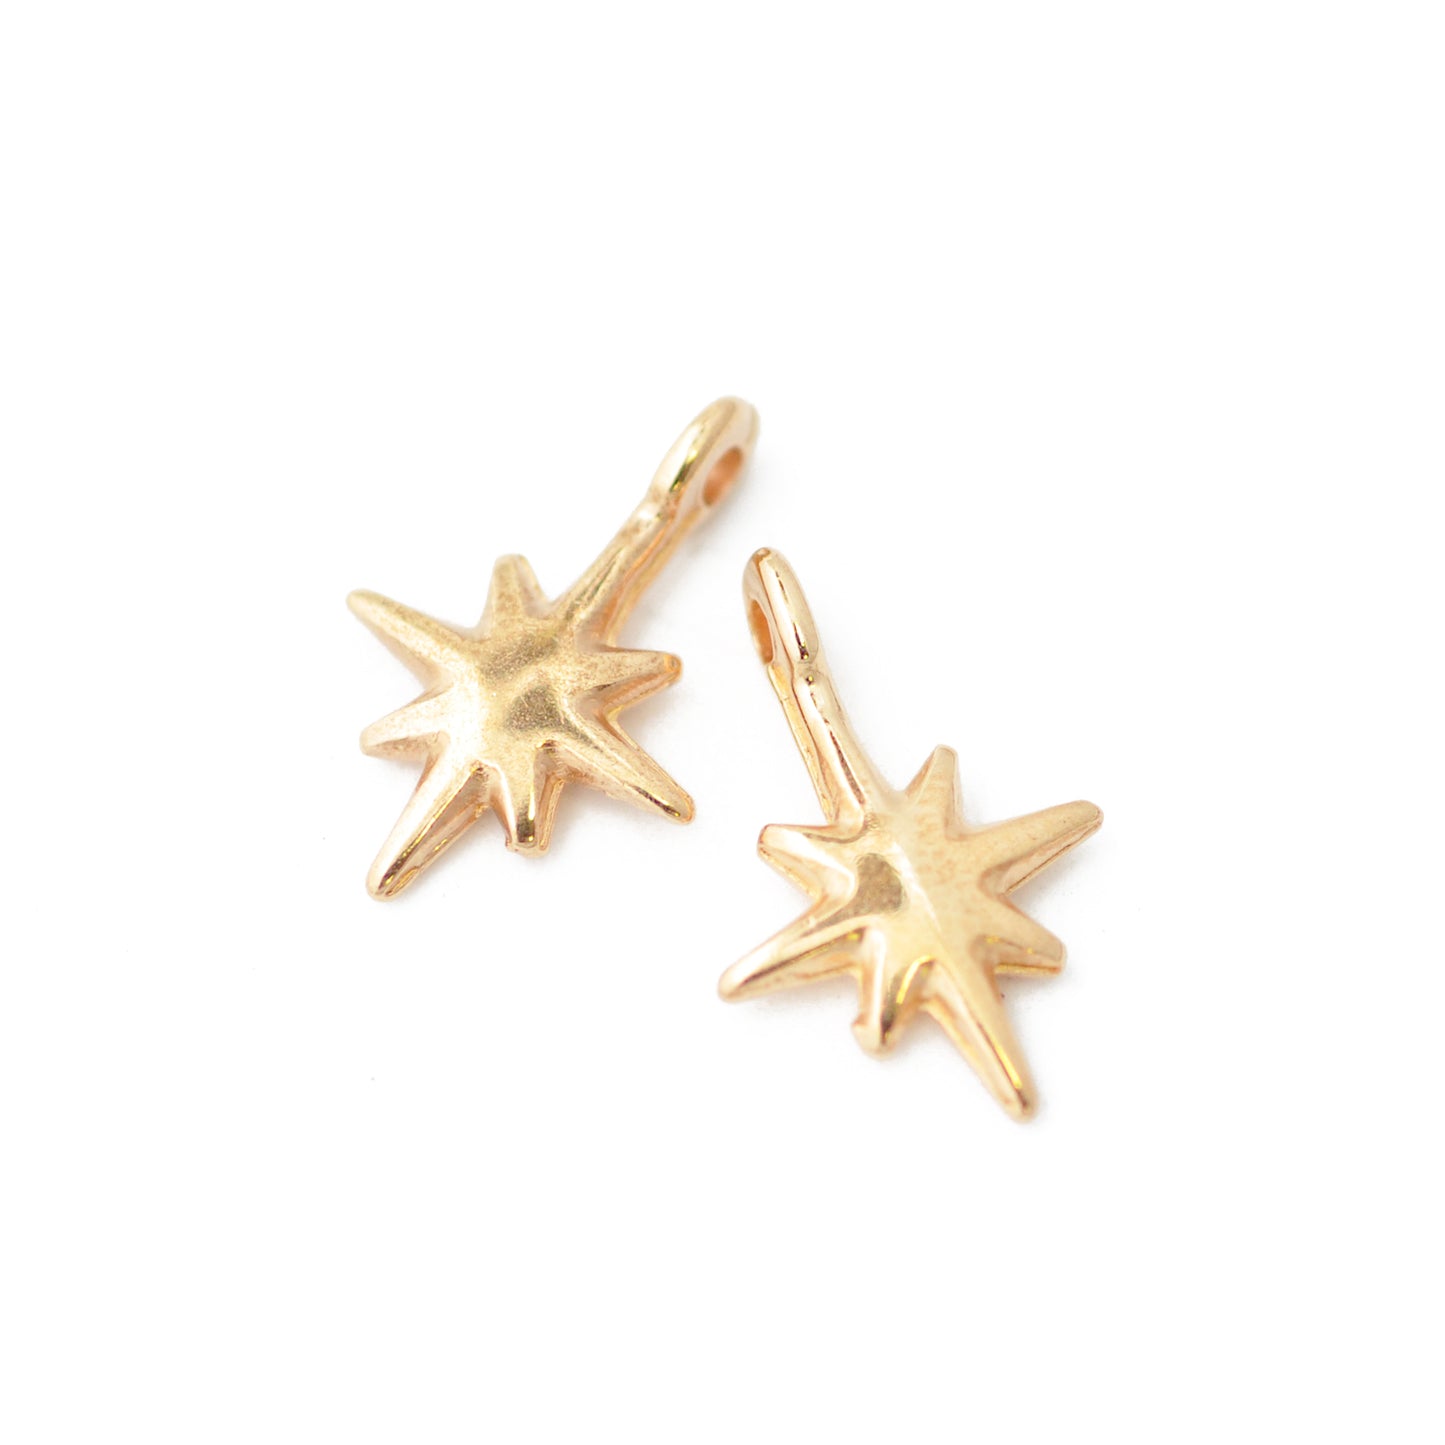 Pole star pendant / 24k rose gold plated / 12 mm